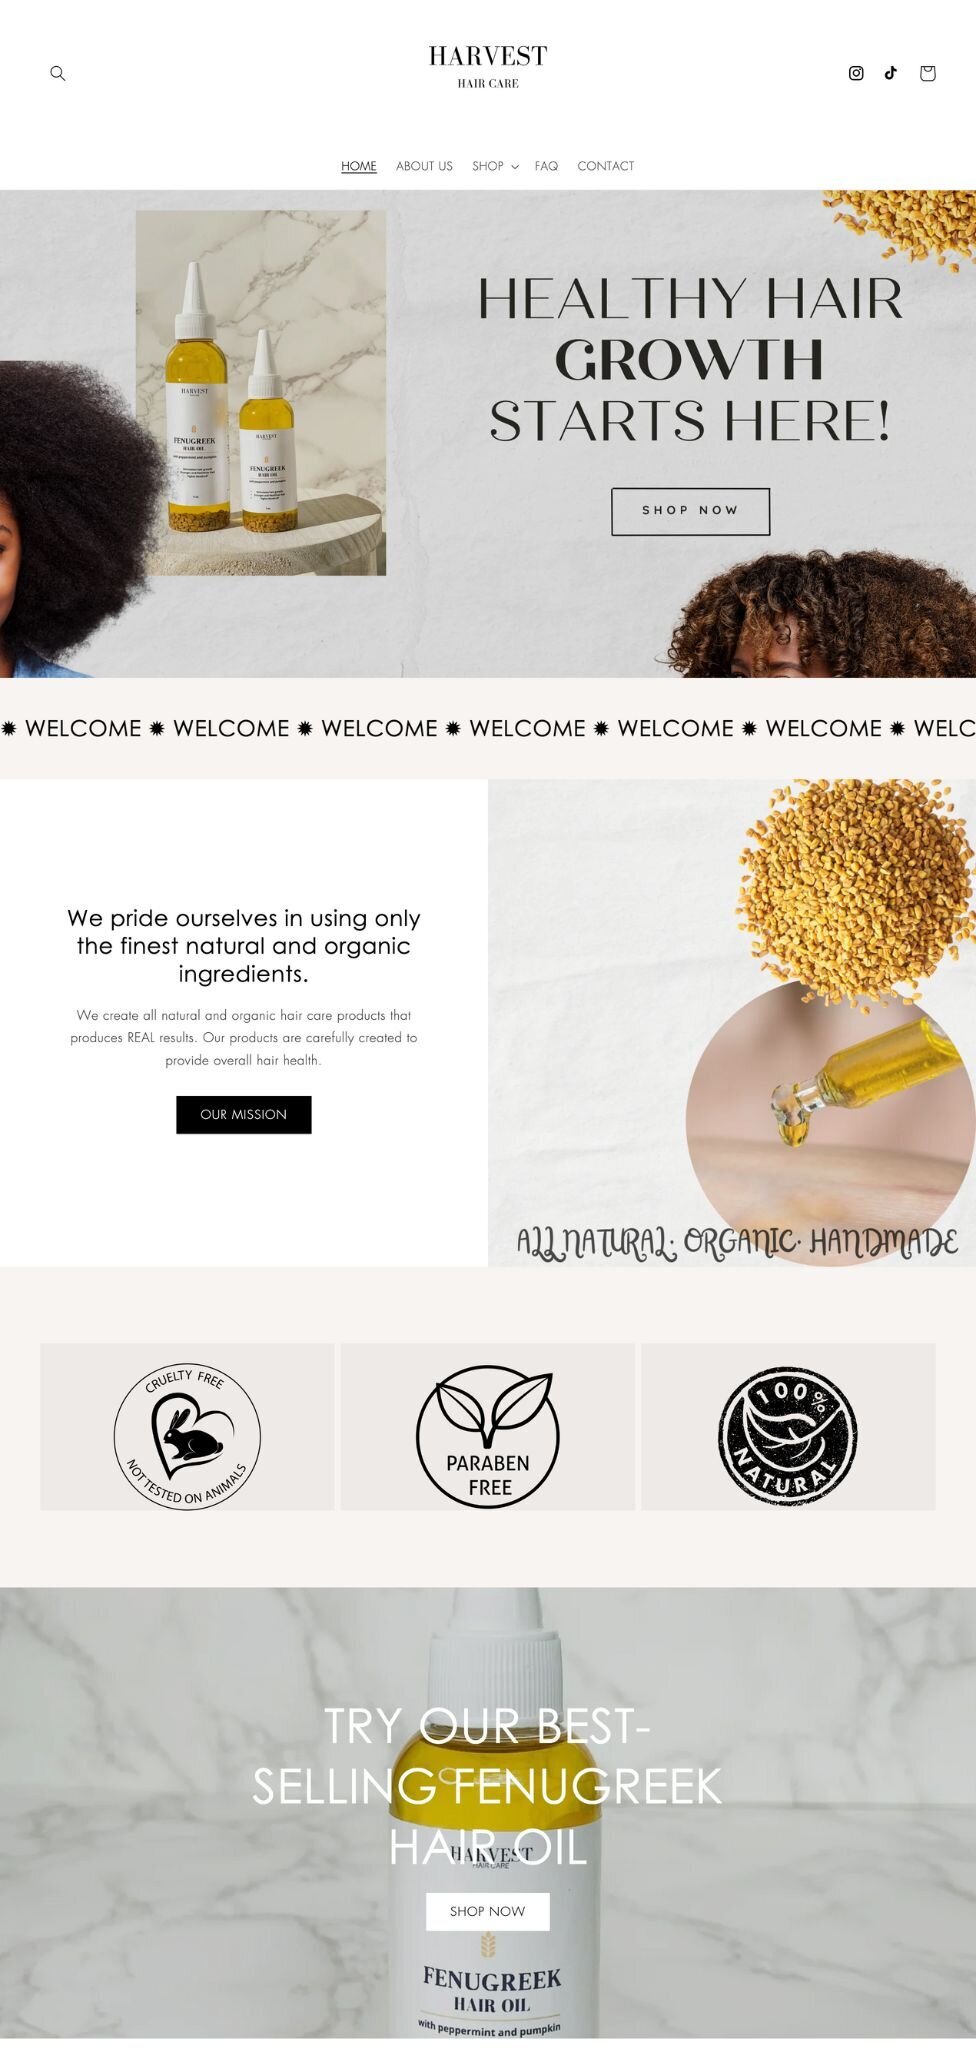 clients-shopify-themes19